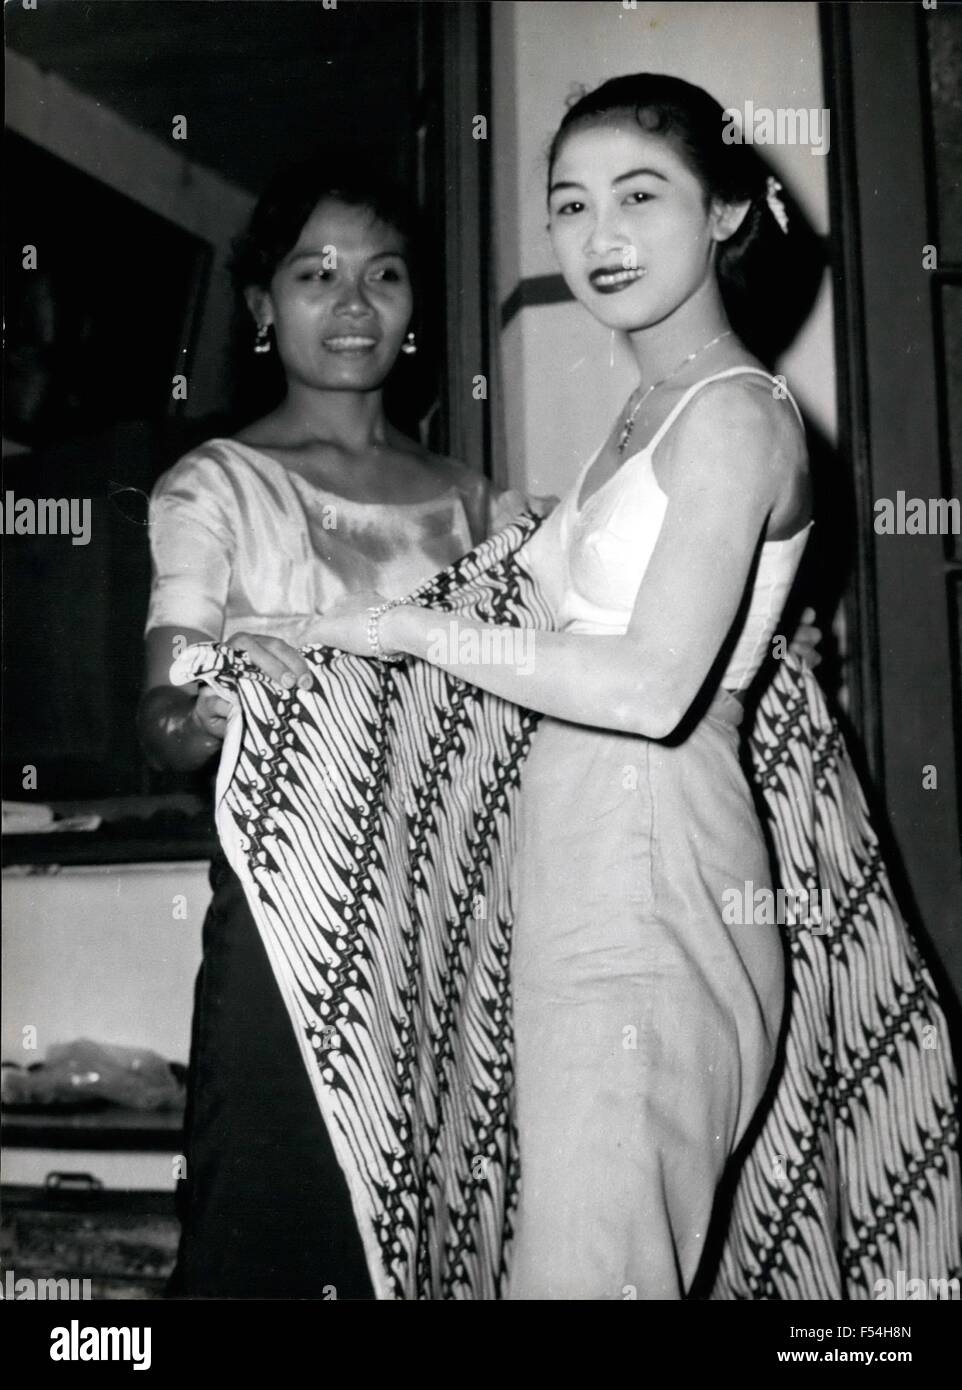 1968 - A Javanese princess dresses for the dance Tomboyish Sri Mulatsih is helped into a traditional hand-dyed solo sarong by Sri Hartinah. She keeps her Weston - style jeans underneath. (Credit Image: © Keystone Pictures USA/ZUMAPRESS.com) Stock Photo